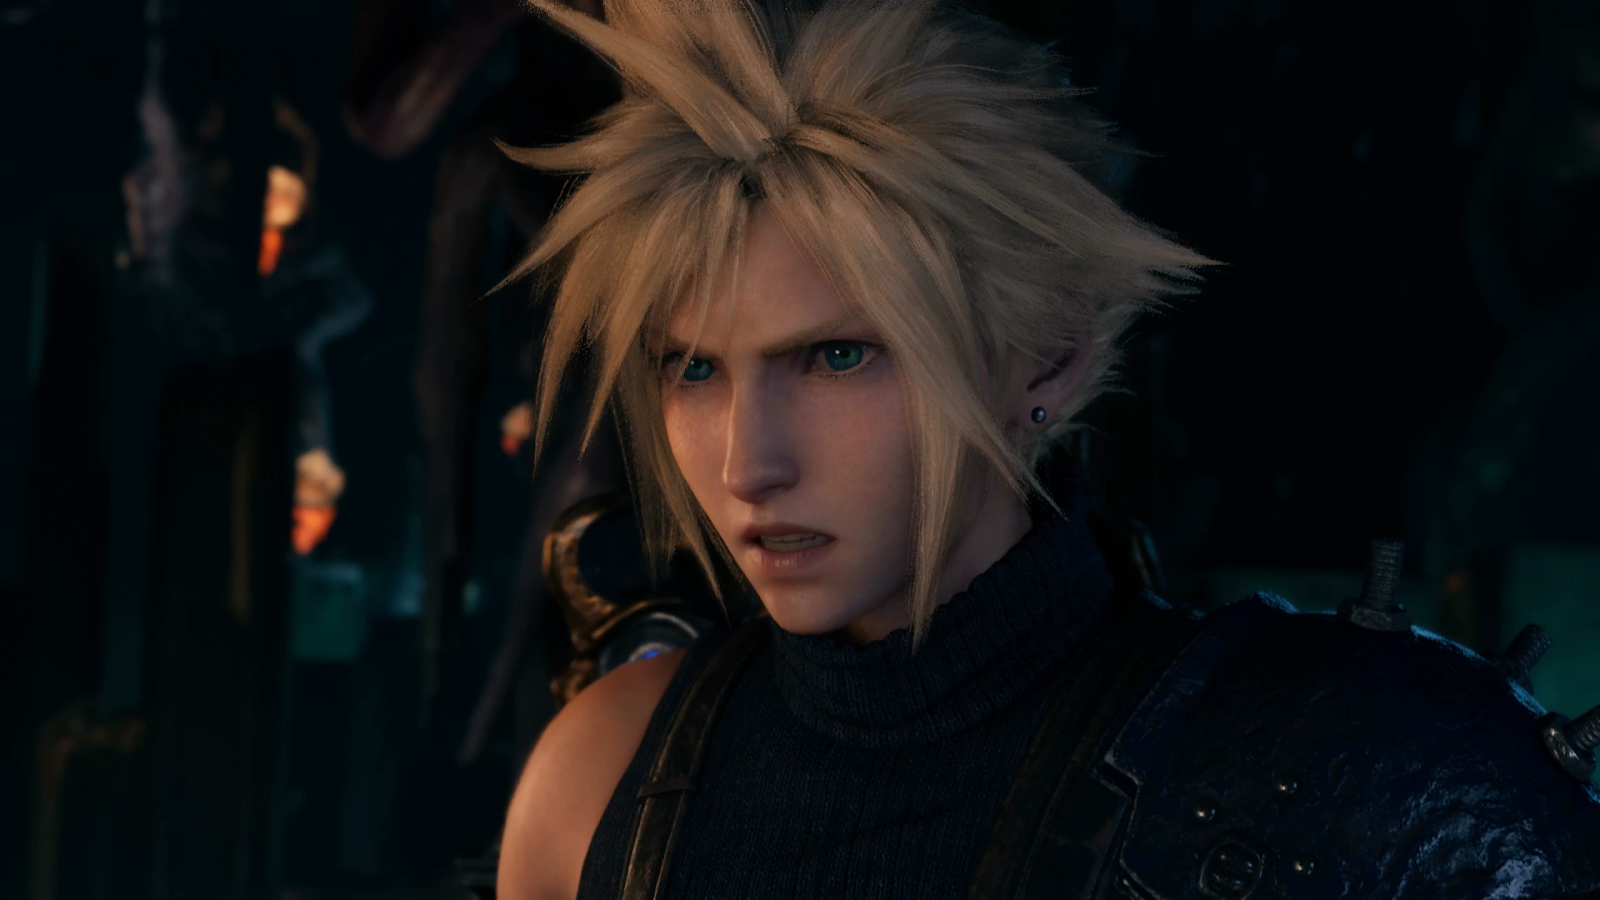 A Late Game Boss Fight Shows Final Fantasy VII Remake At Its Best